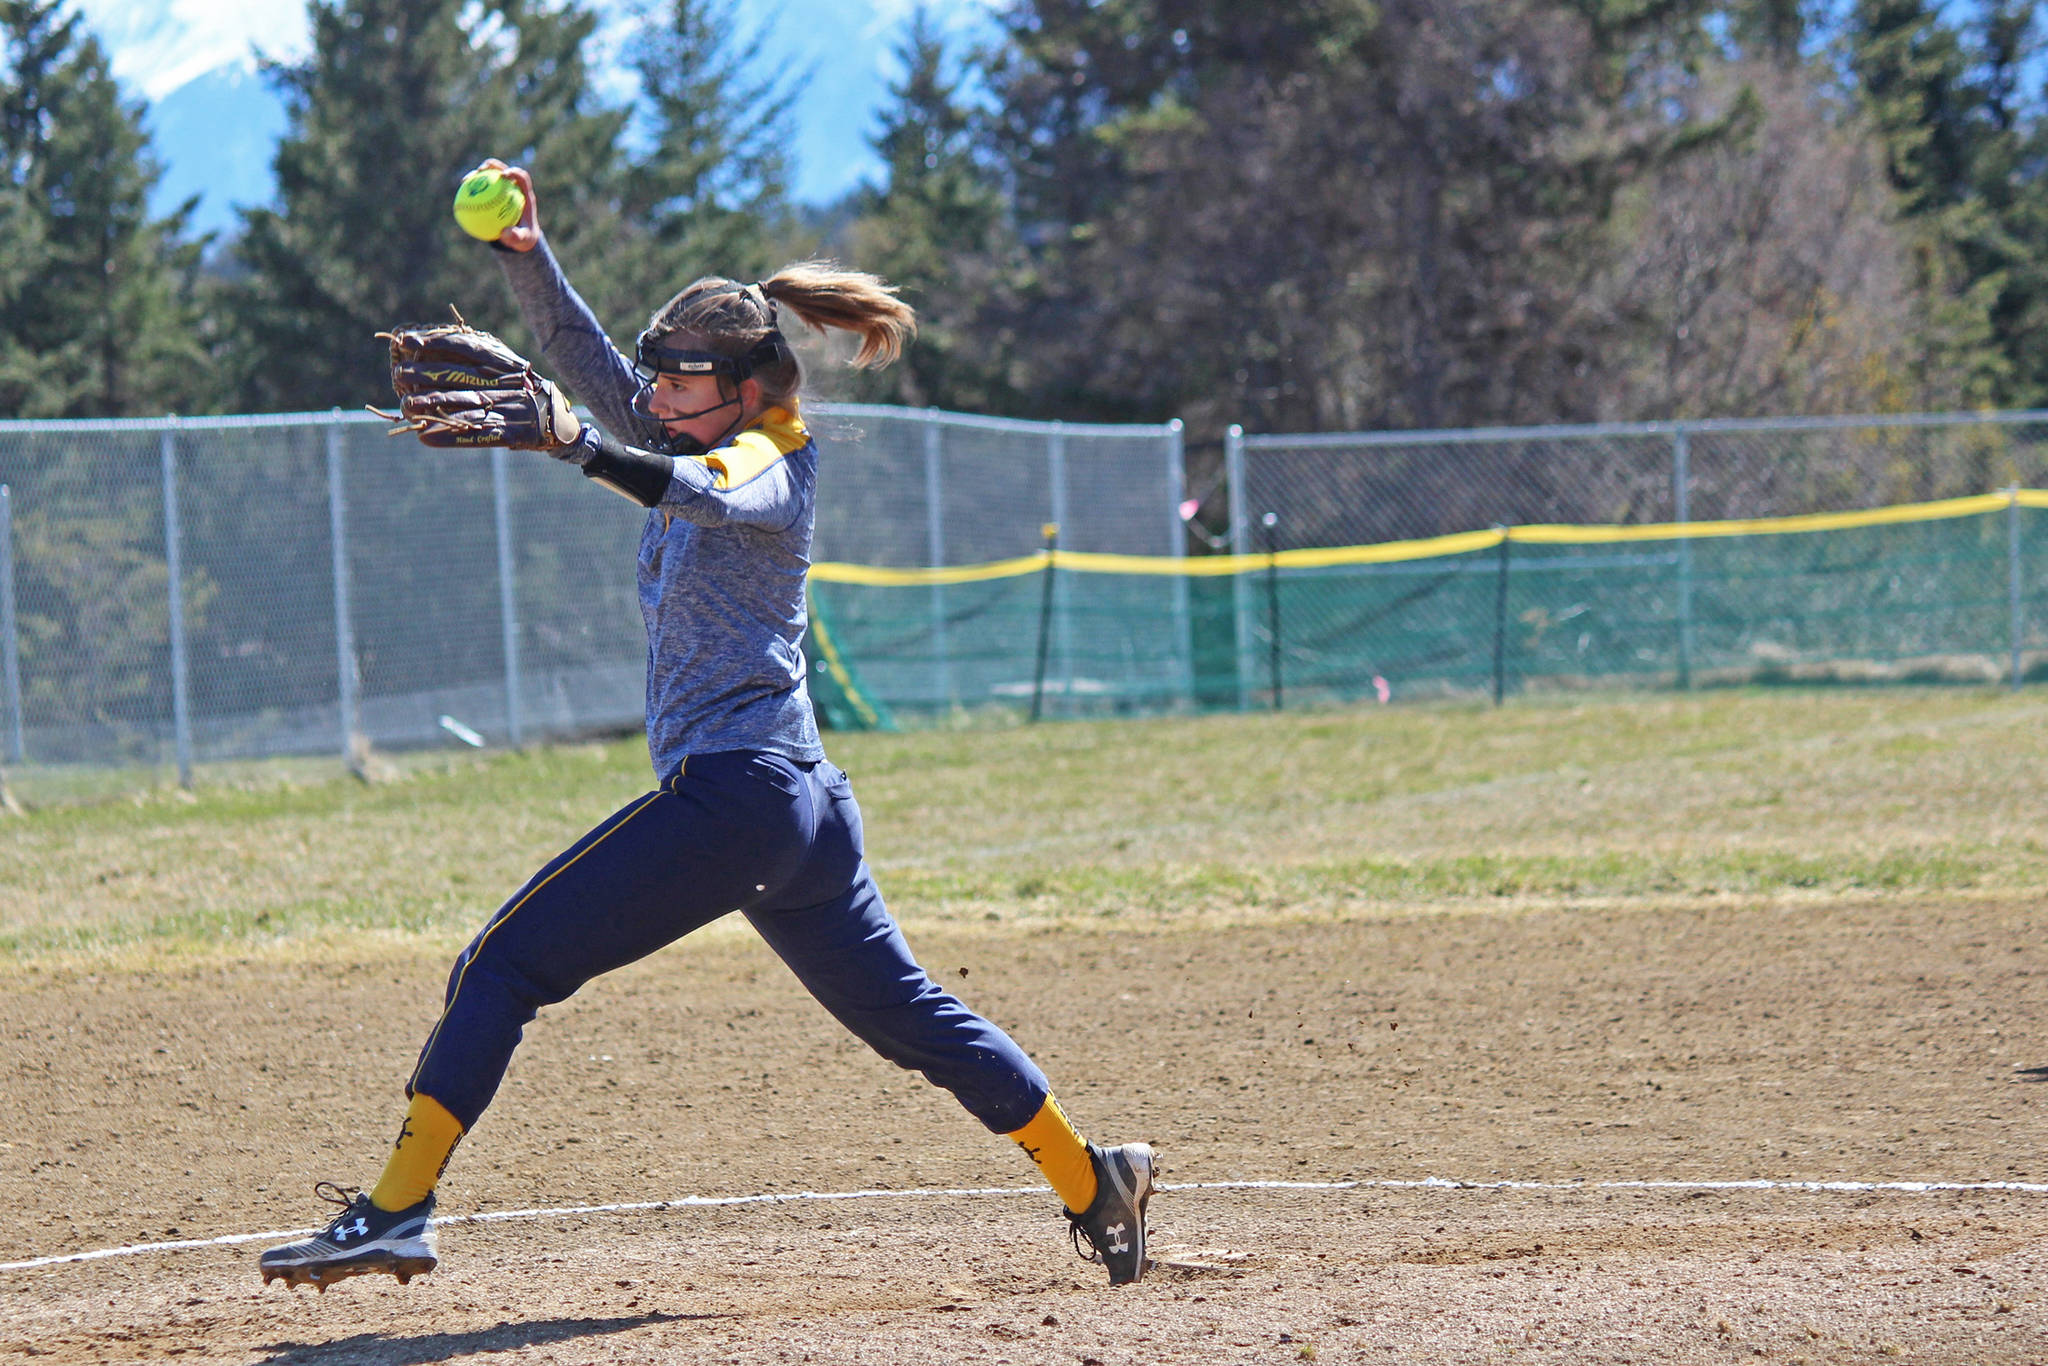 Pitcher Annalynn Brown winds up to send a ball over the plate during the Homer Mariner’s Saturday, April 27, 2019, game against the Kodiak Bears at Jack Gist Park in Homer, Alaska. (Photo by McKibben Jackinsky)